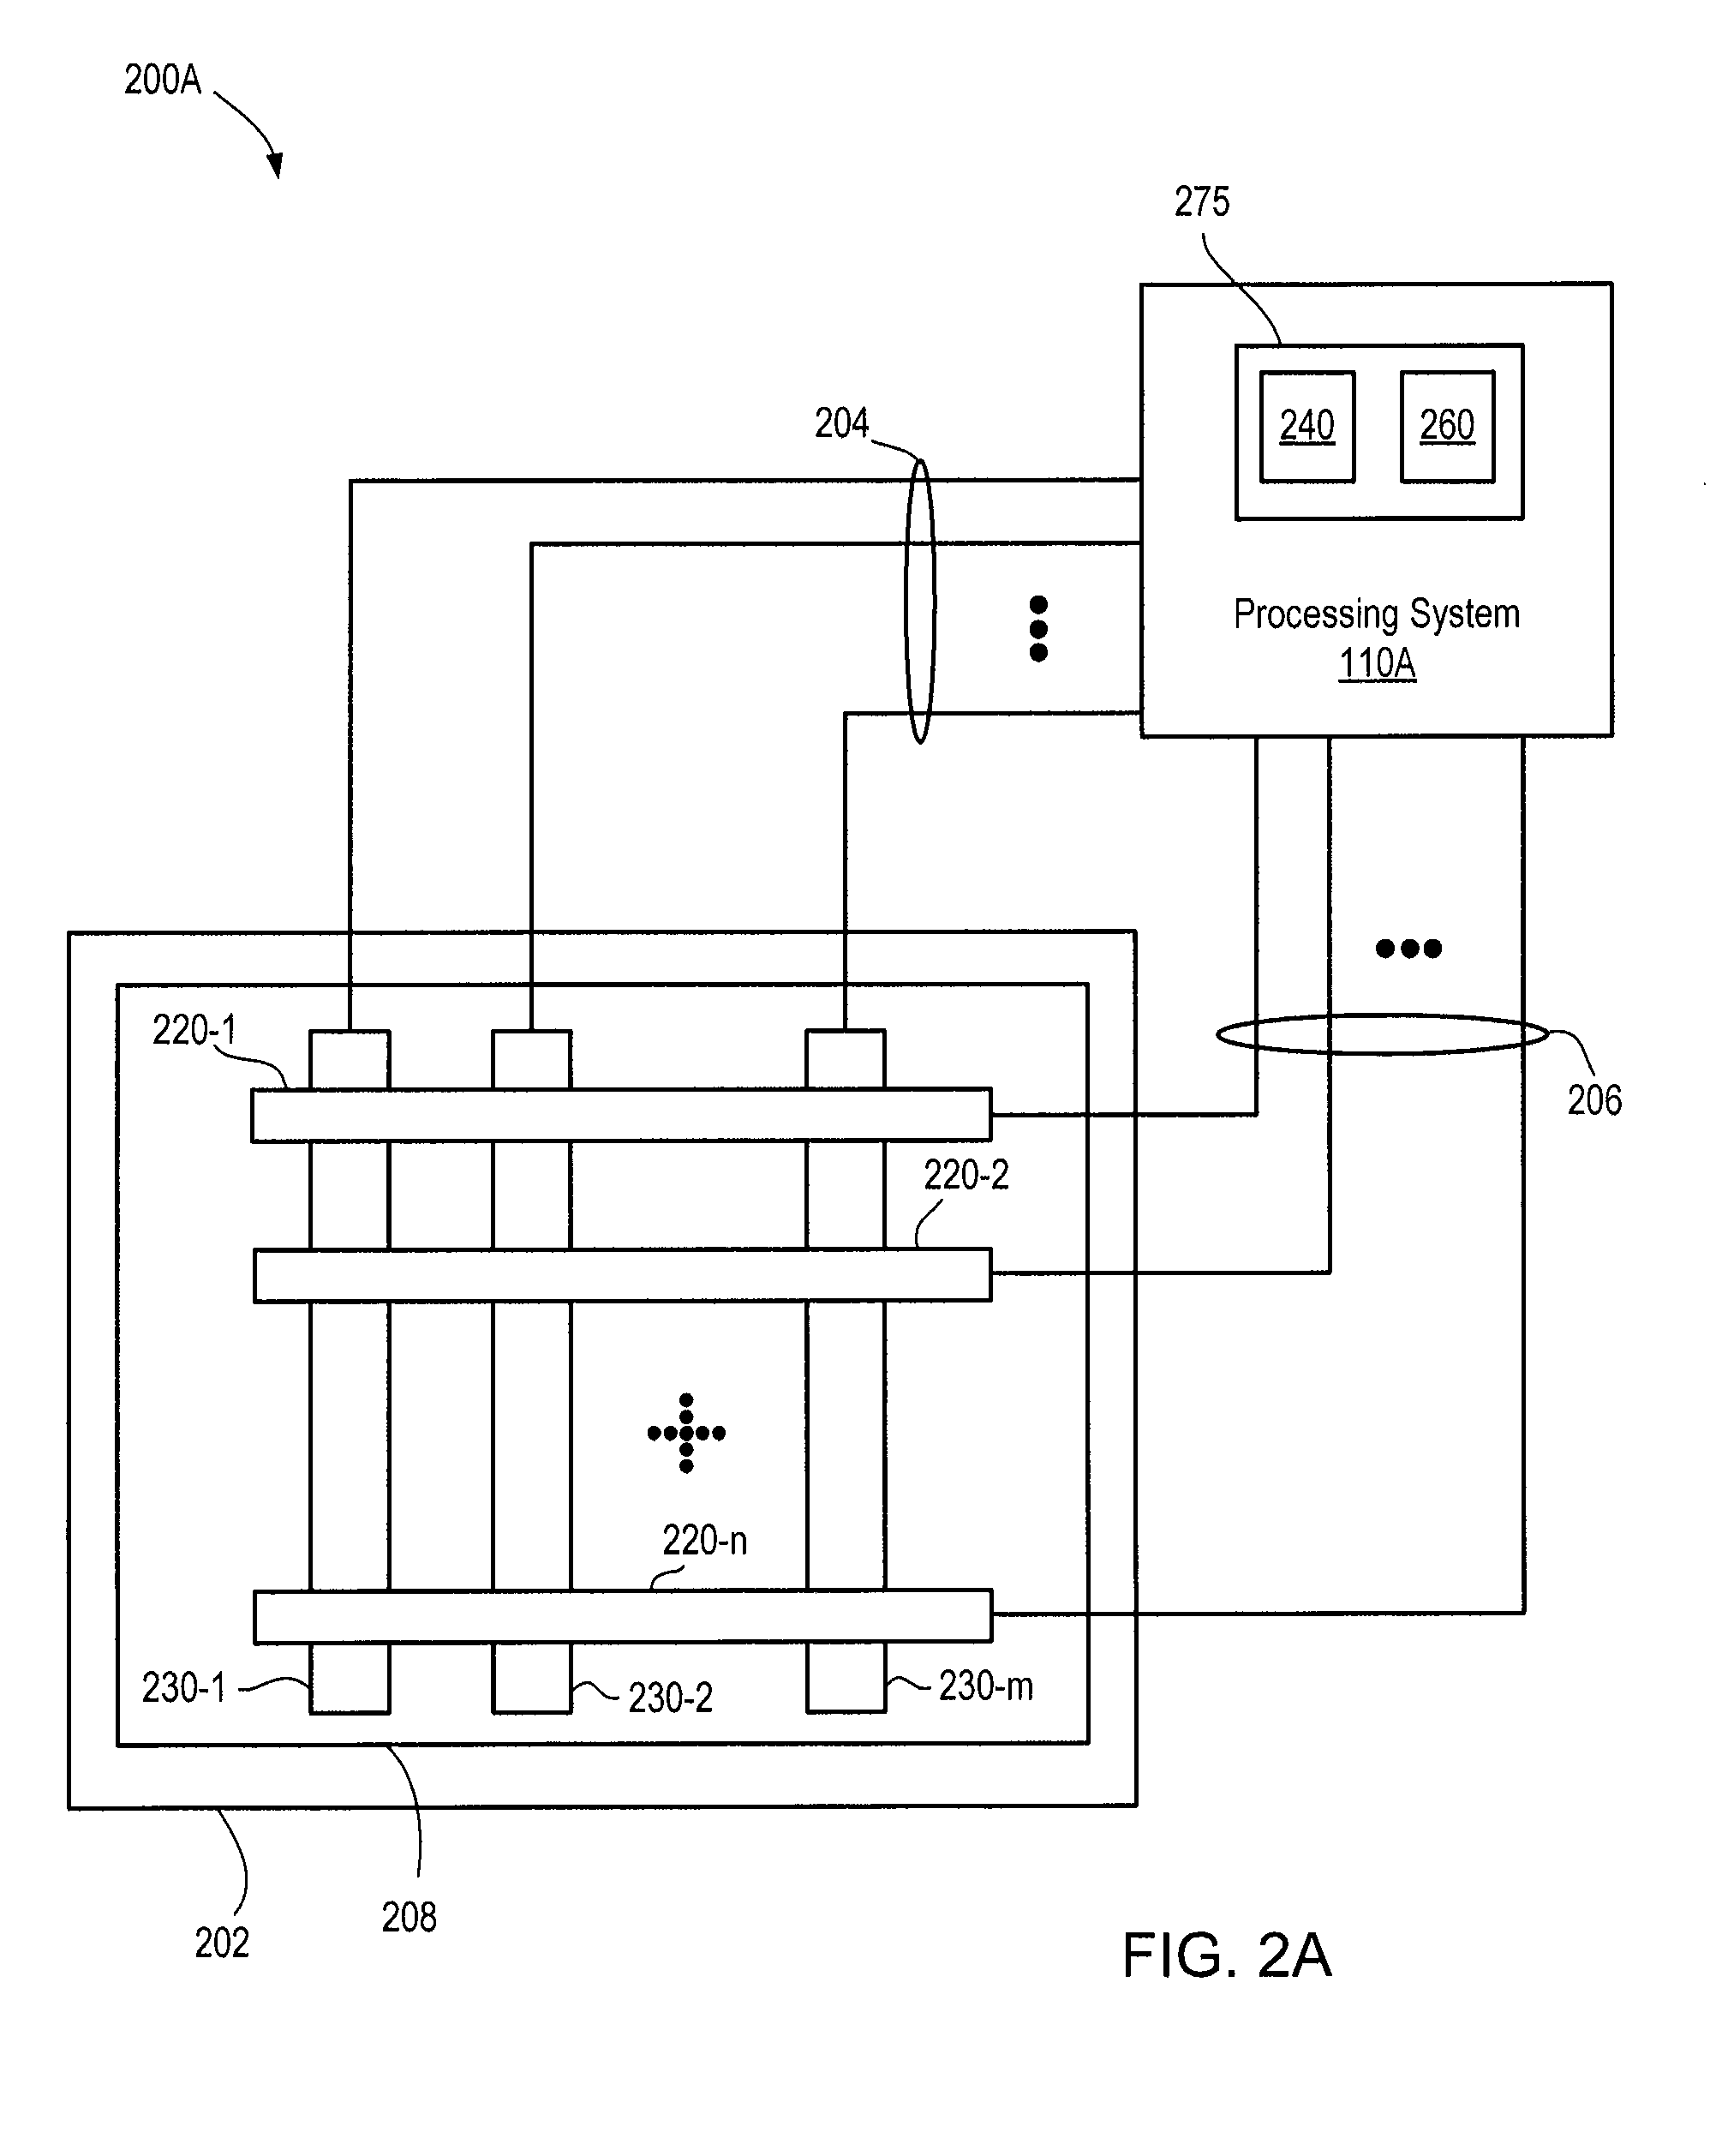 Calibrating charge mismatch in a baseline correction circuit